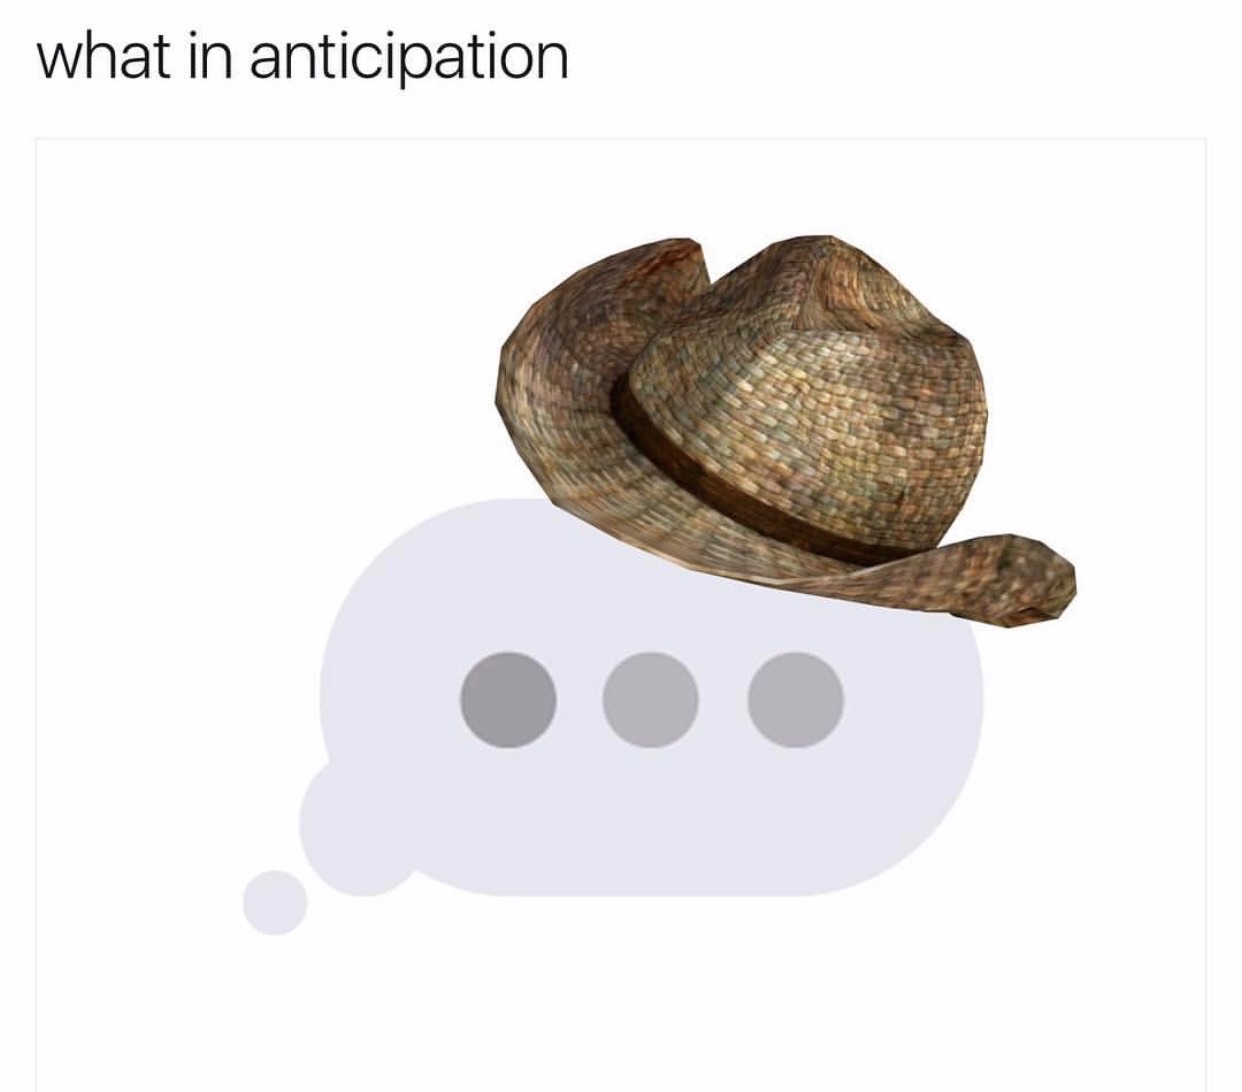 wot in anticipation meme - what in anticipation